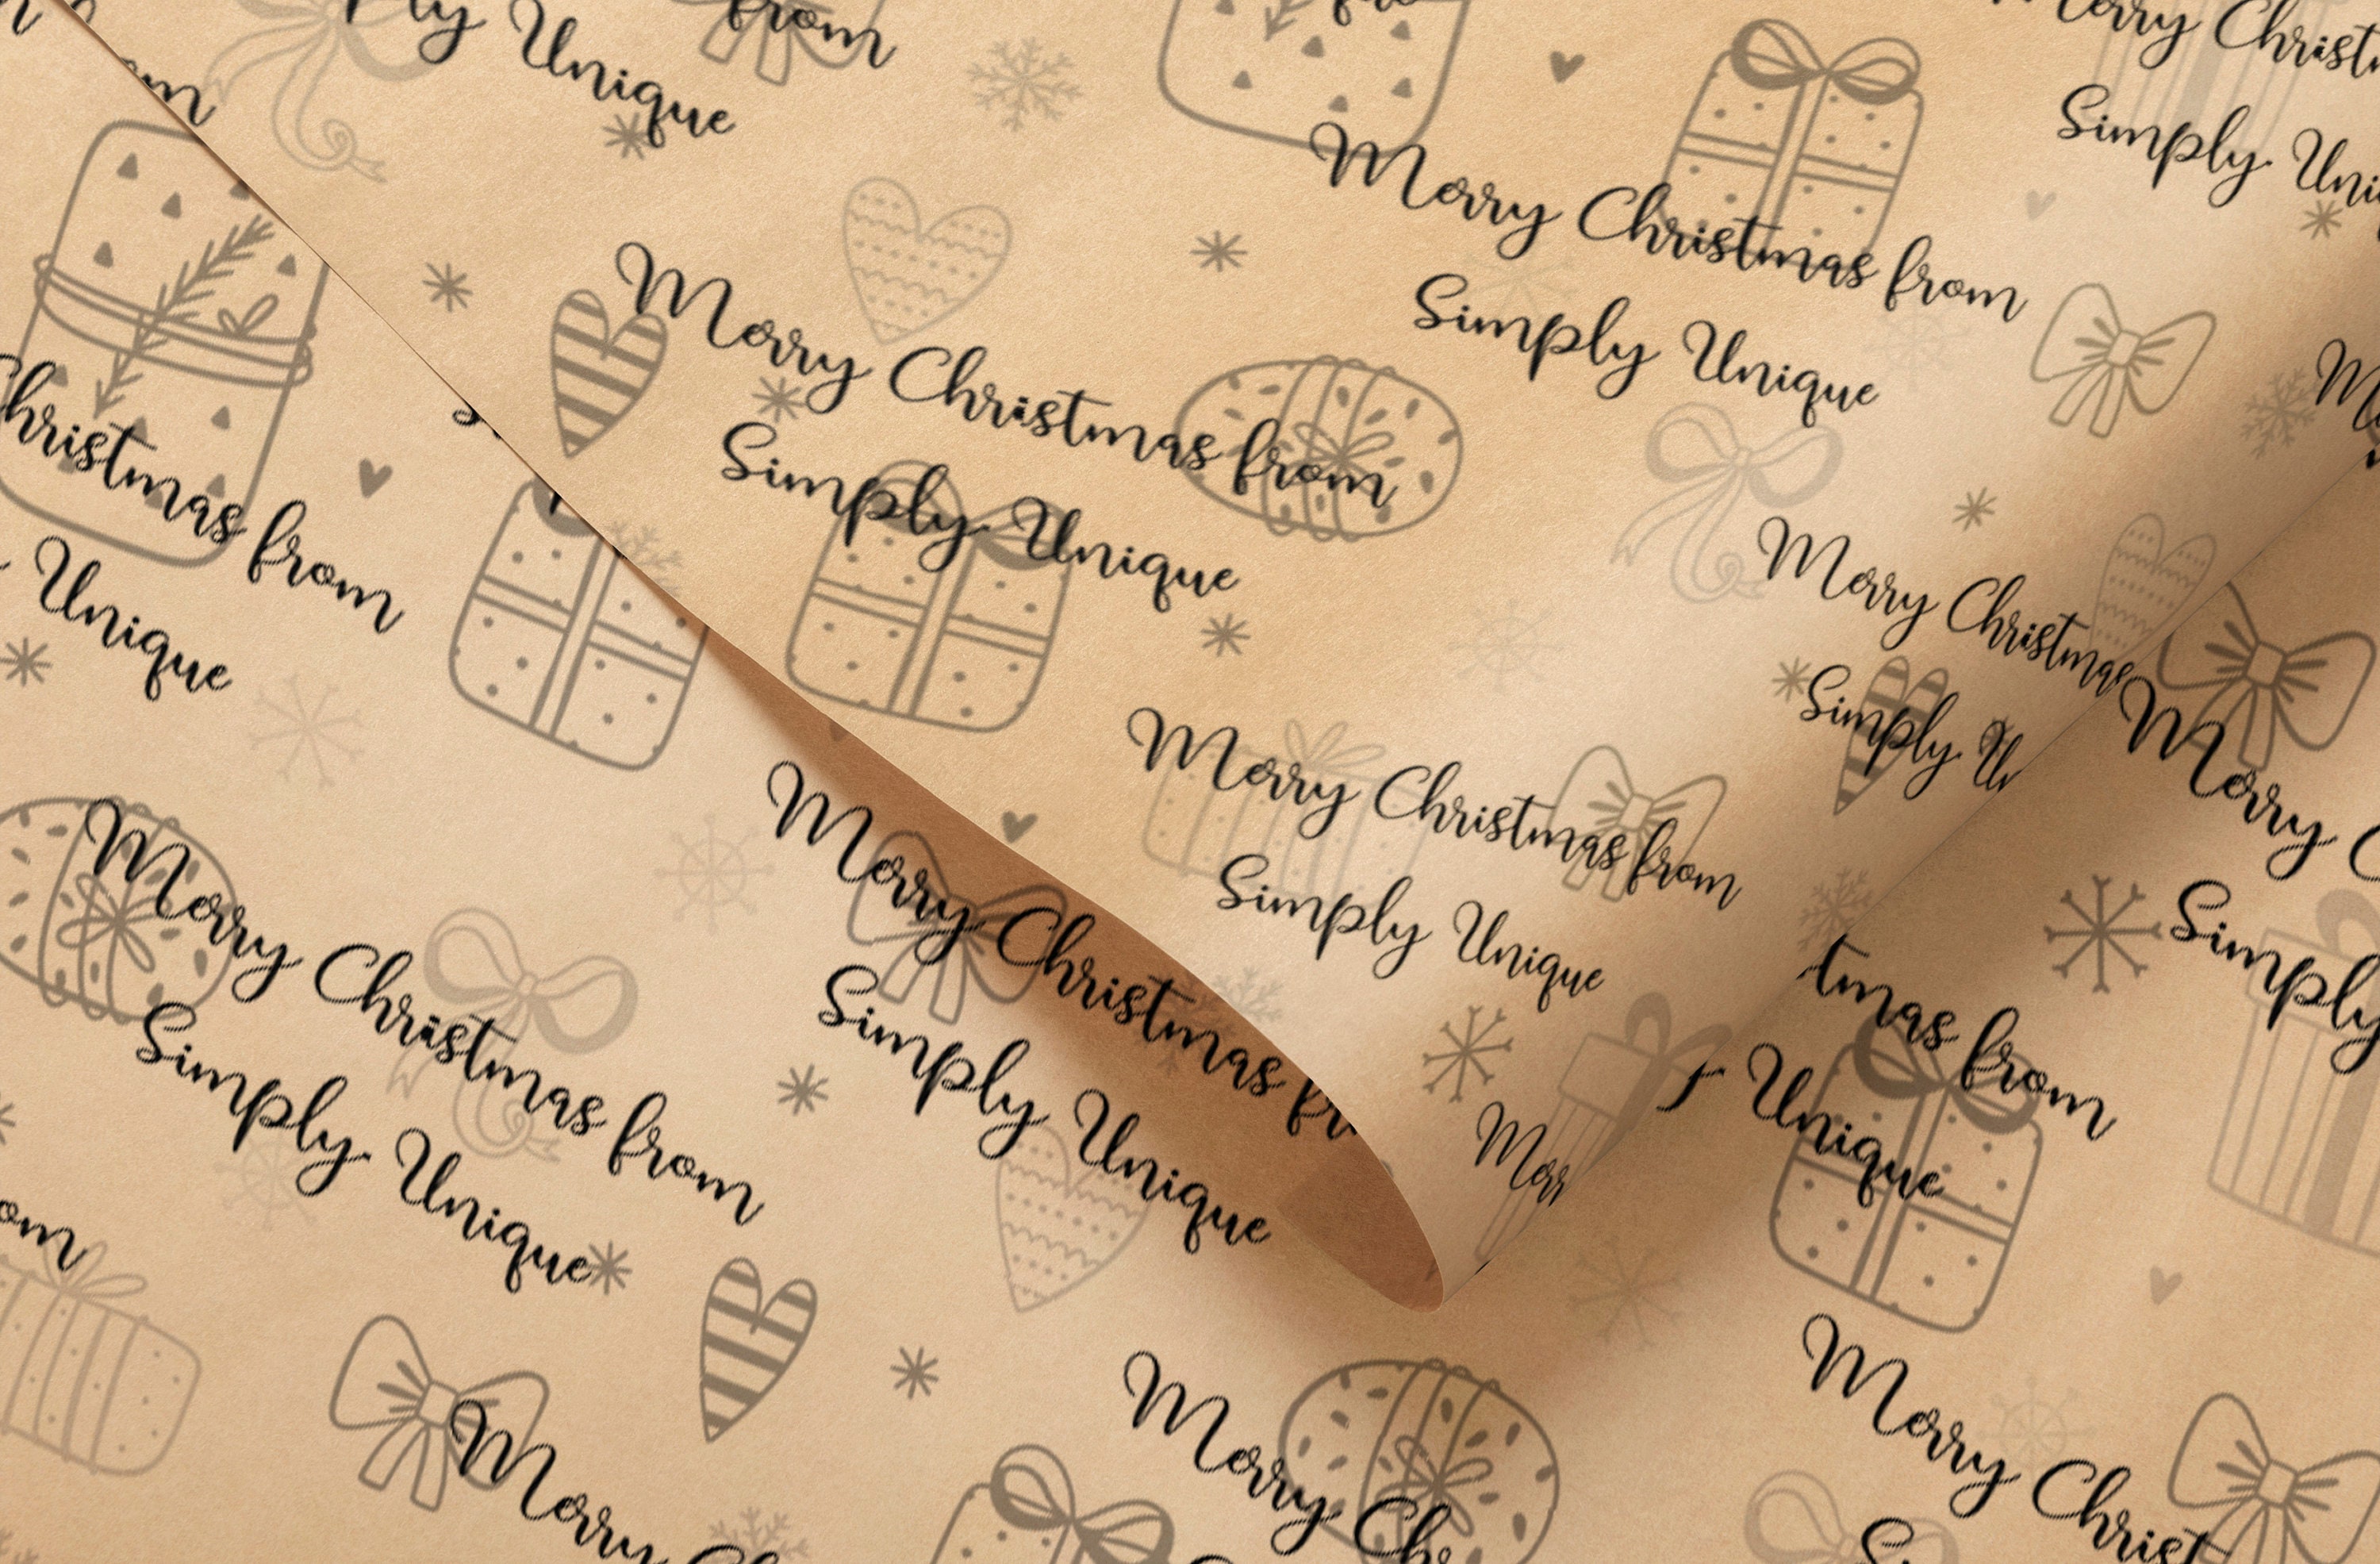 Personalised Vellum Paper, Packing Paper, Branded Packaging Premium Vellum,  Your Logo Paper 112gsm, Small Business, Tissue Paper, Recyclable 